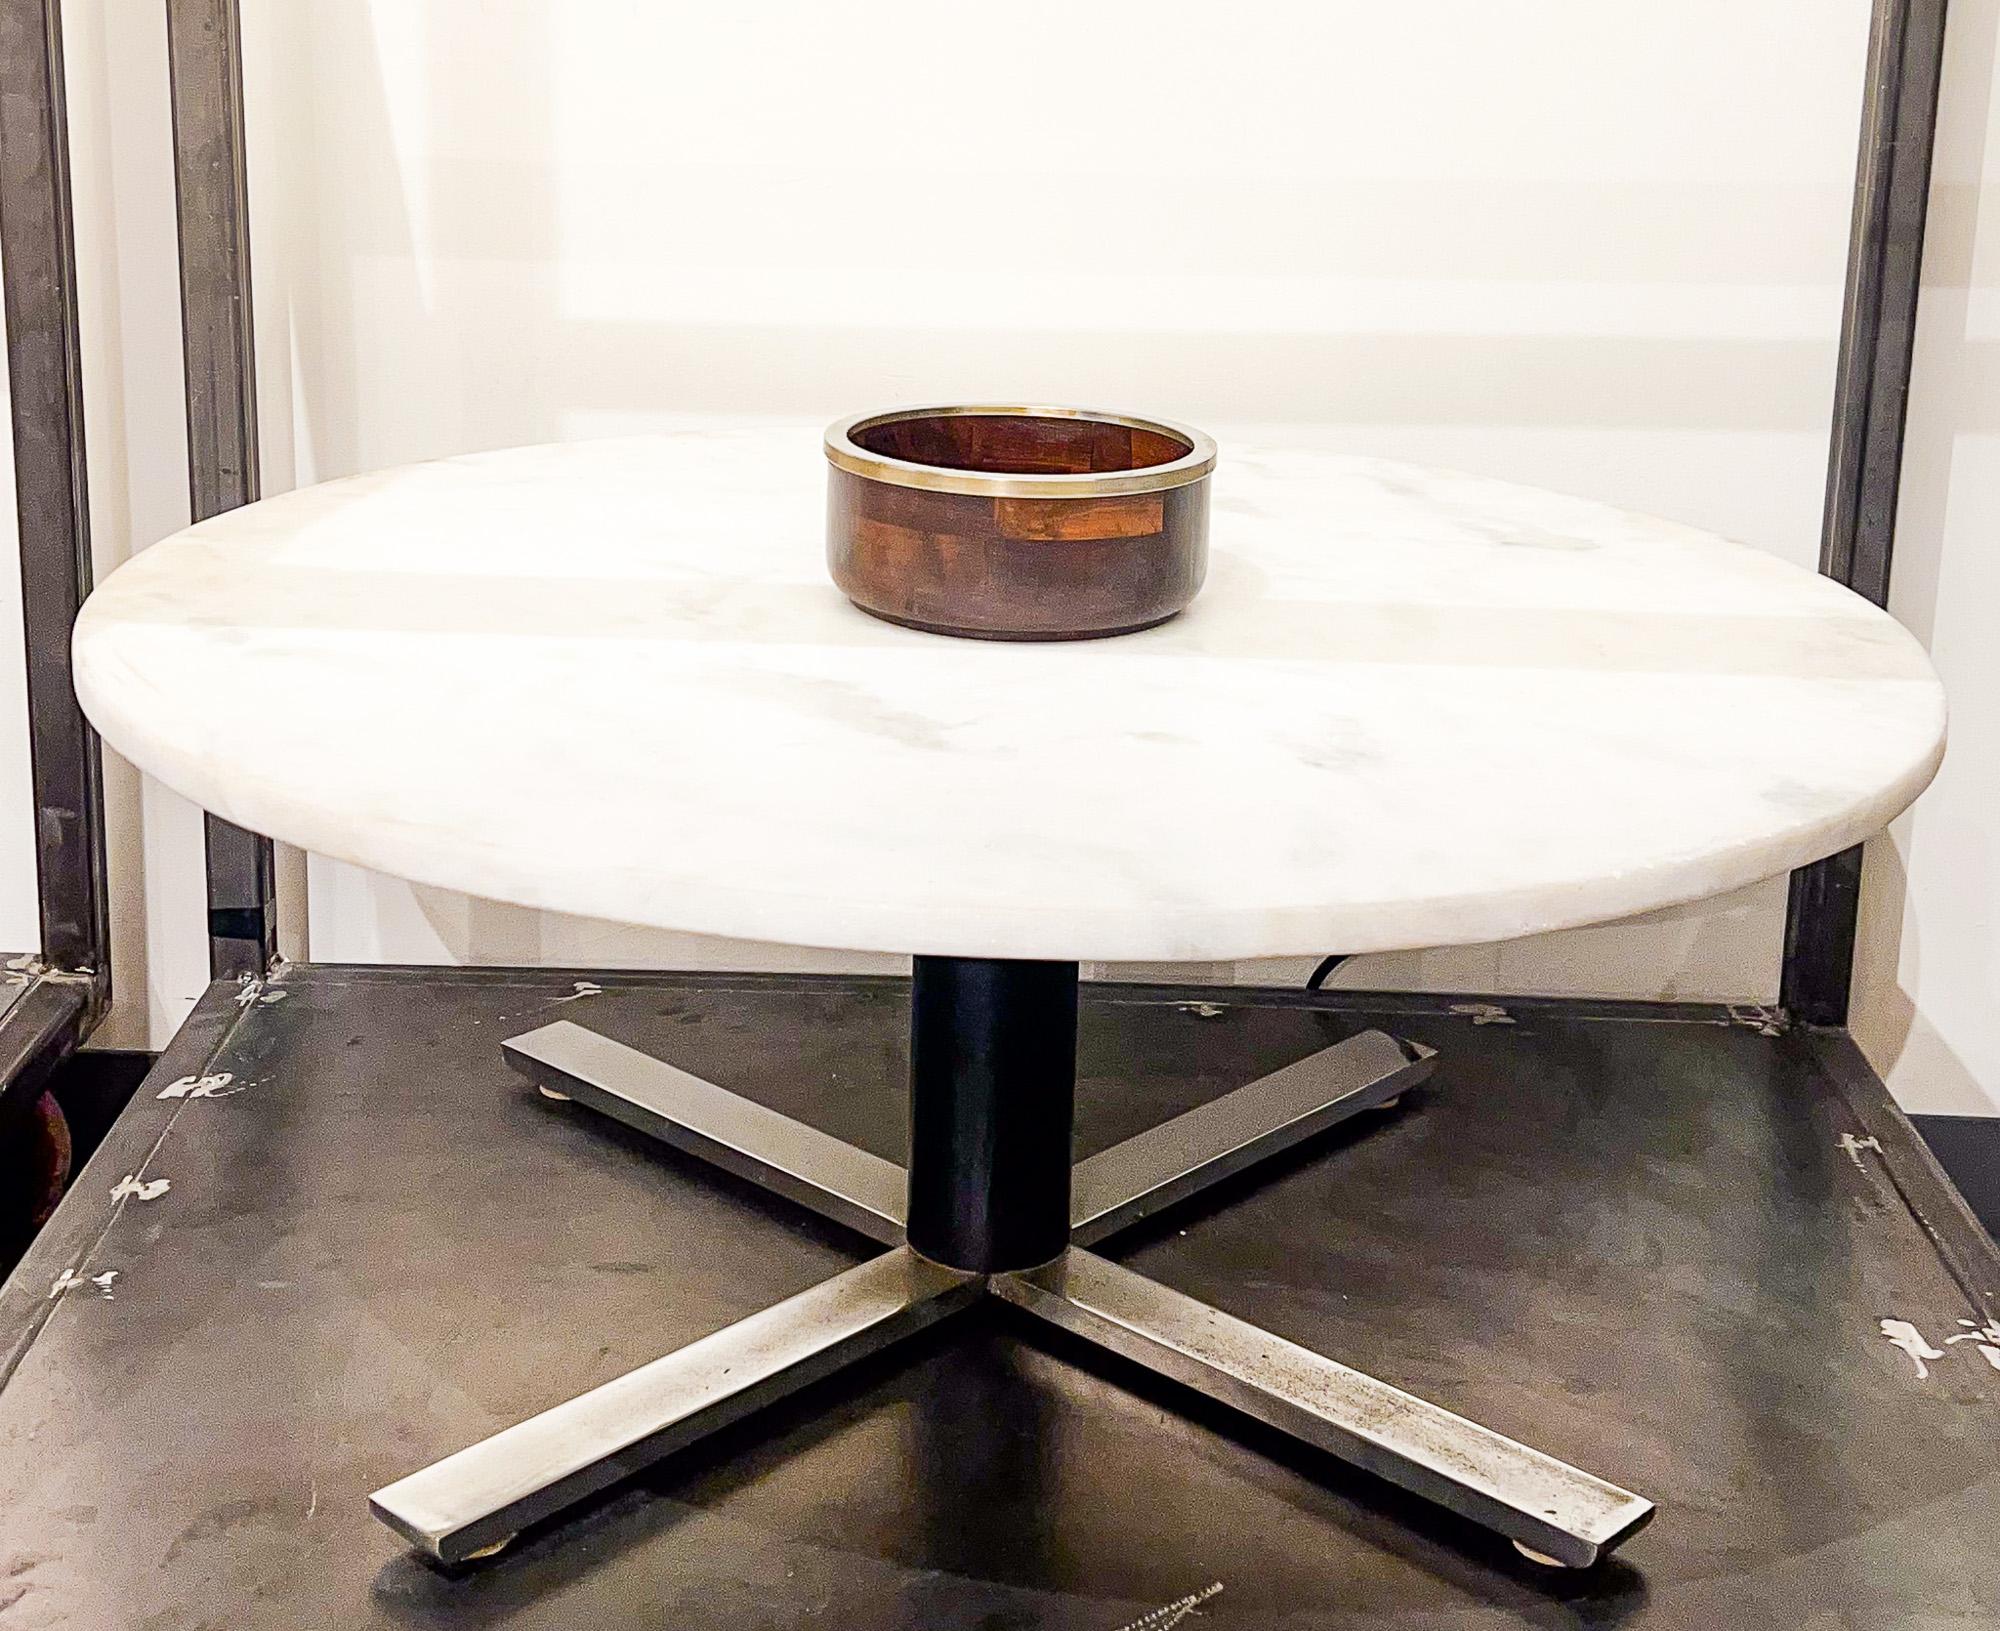 Brazilian “Chancellor” Coffee Table with Marble Top by Jorge Zalszupin, c. 1960